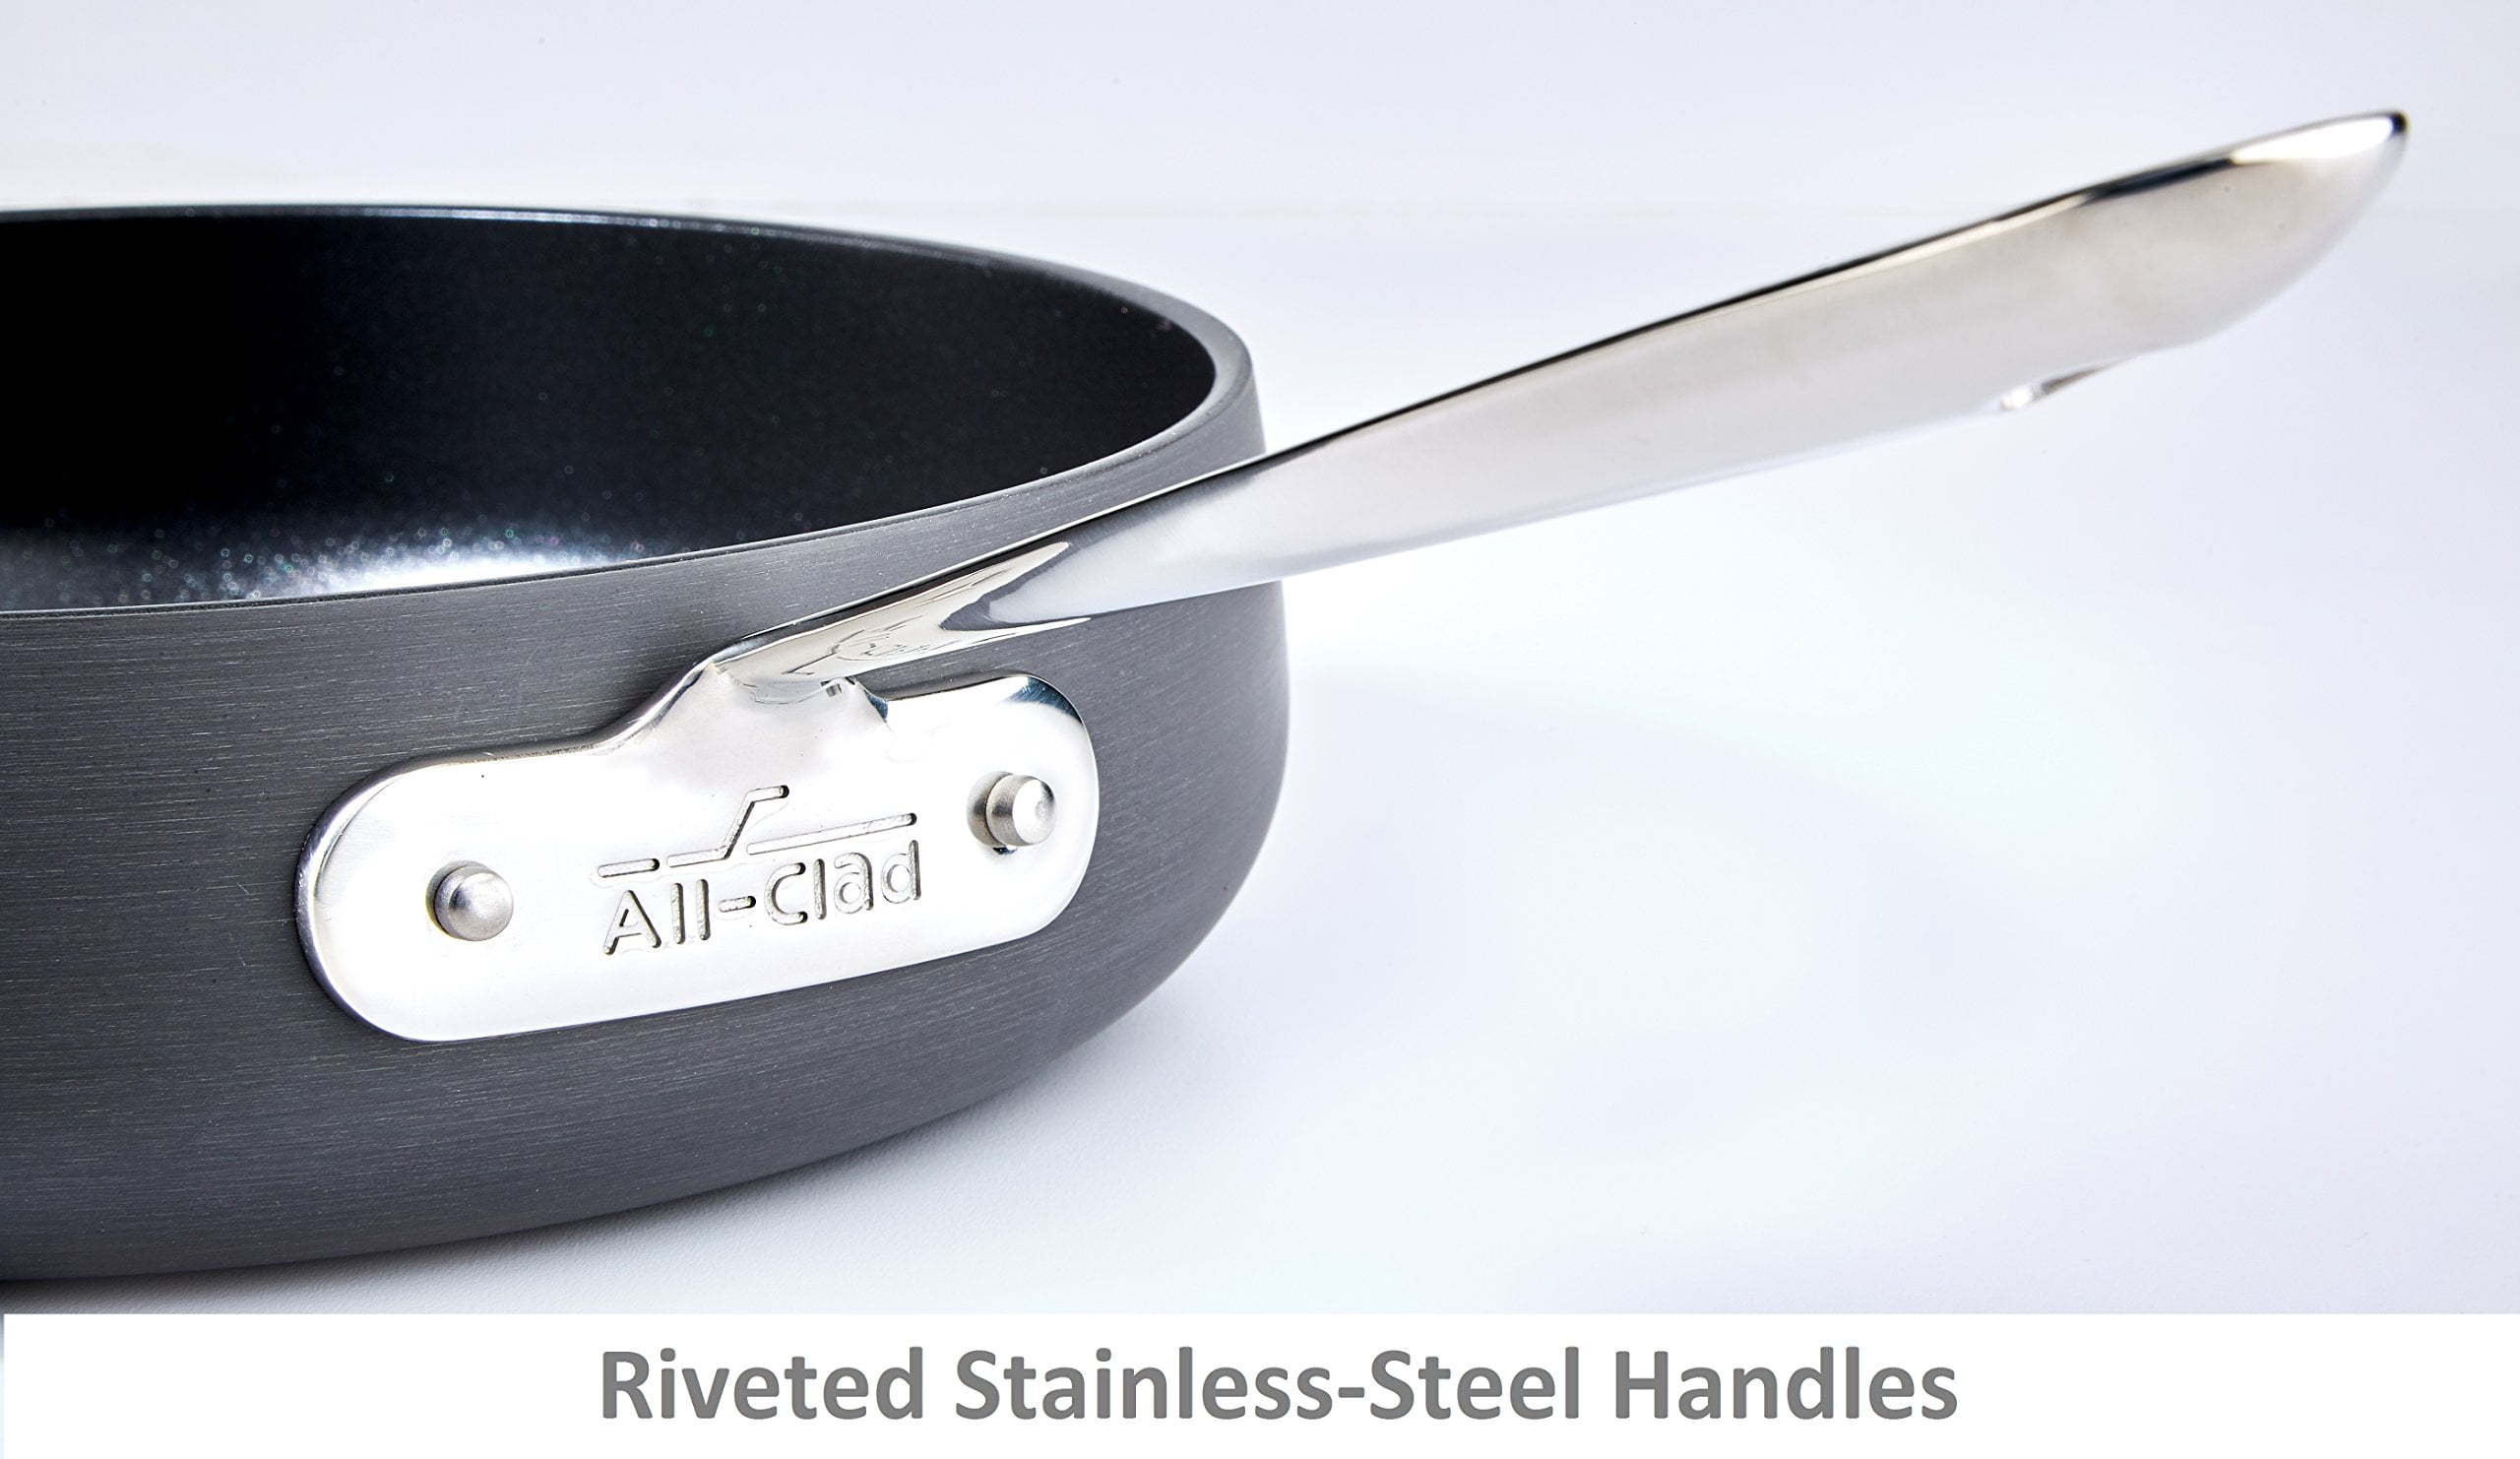 All-Clad HA1 Nonstick Sauce Pan with Lid